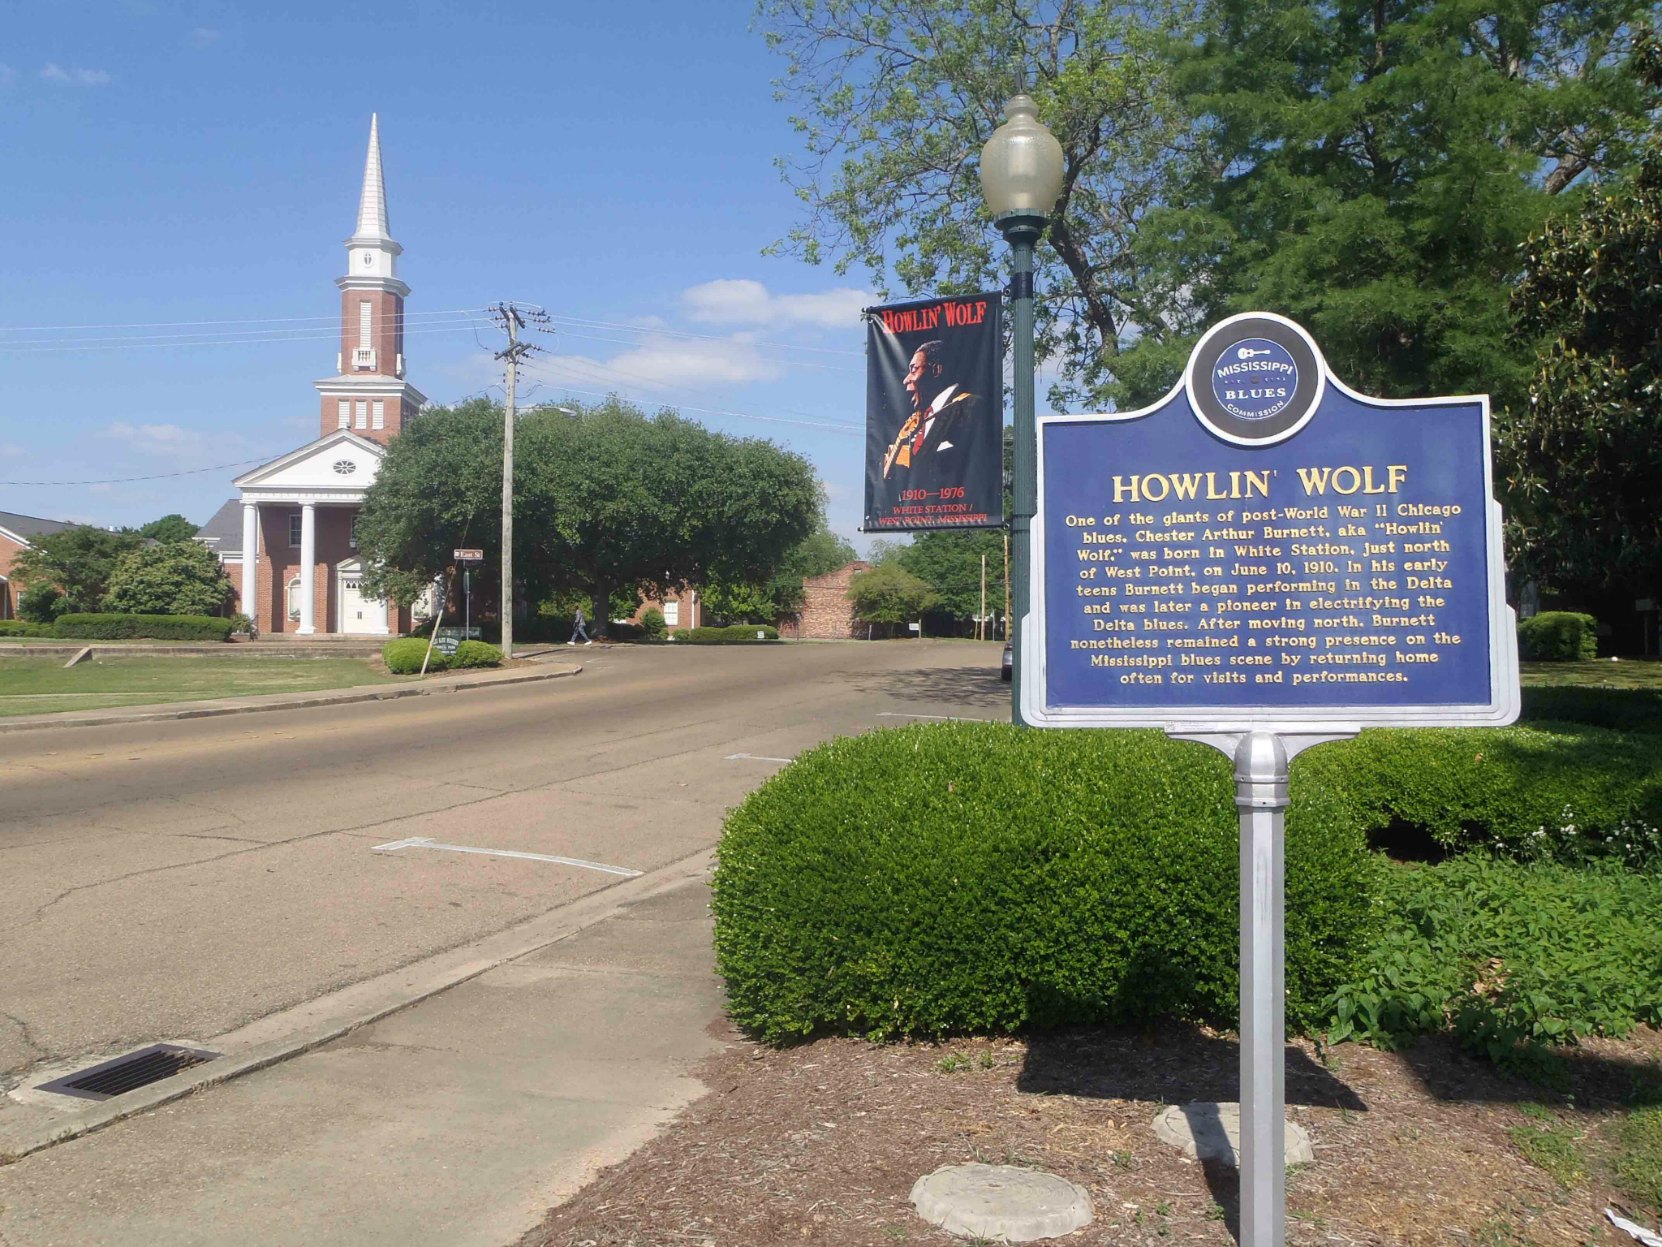 Mississippi Blues Trail marker for Howlin' Wolf, West Point, Clay County, Mississippi